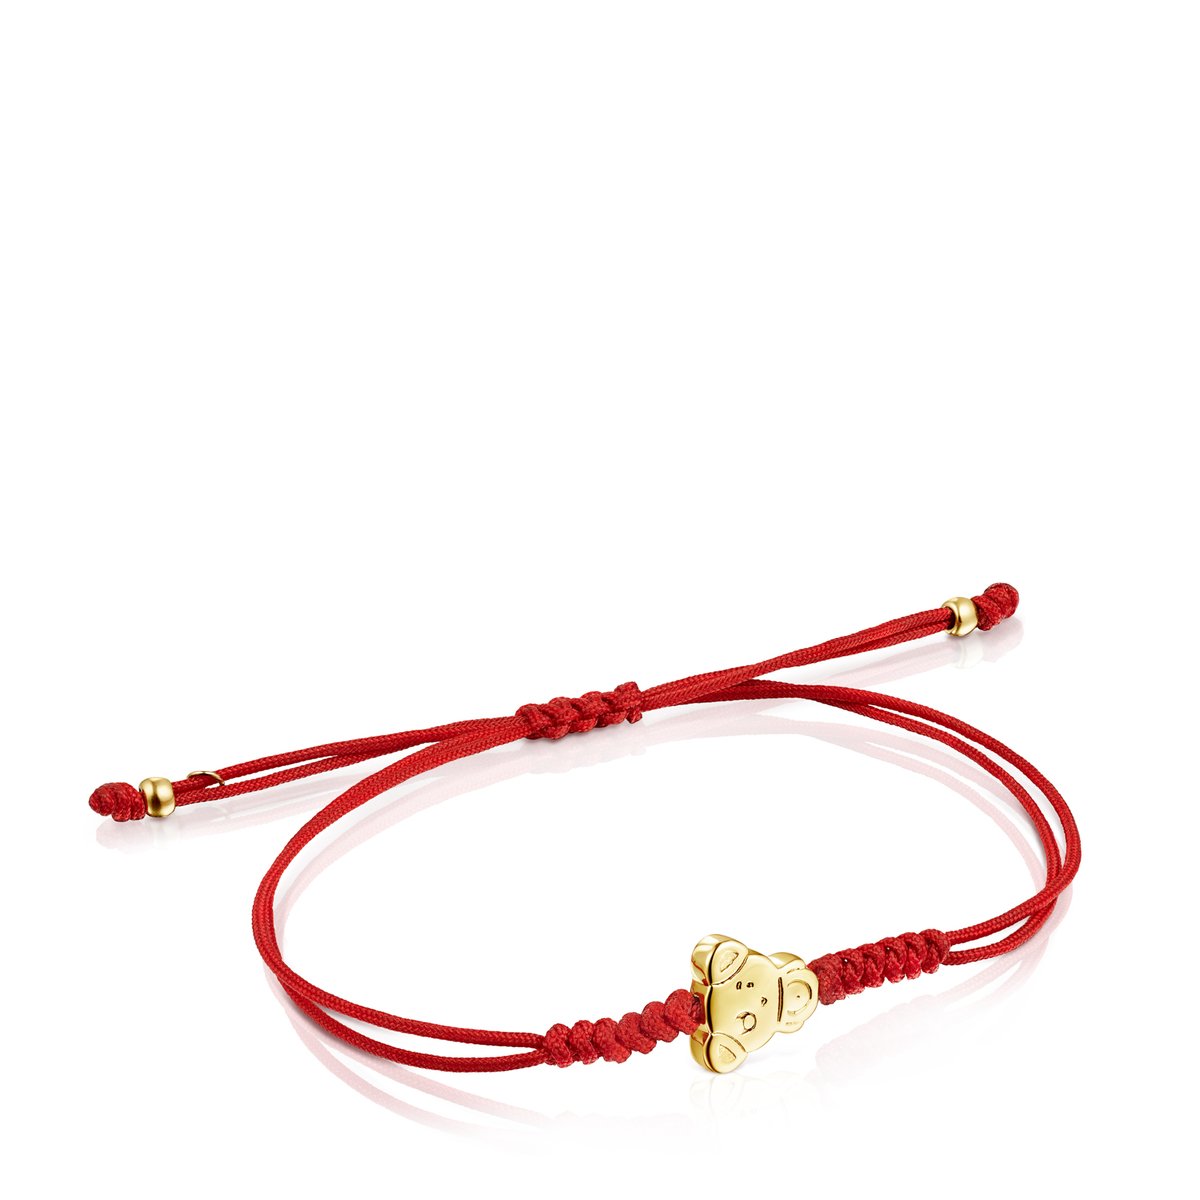 Tous Chinese Horoscope Dog Bracelet in Gold and Red Cord 918431090